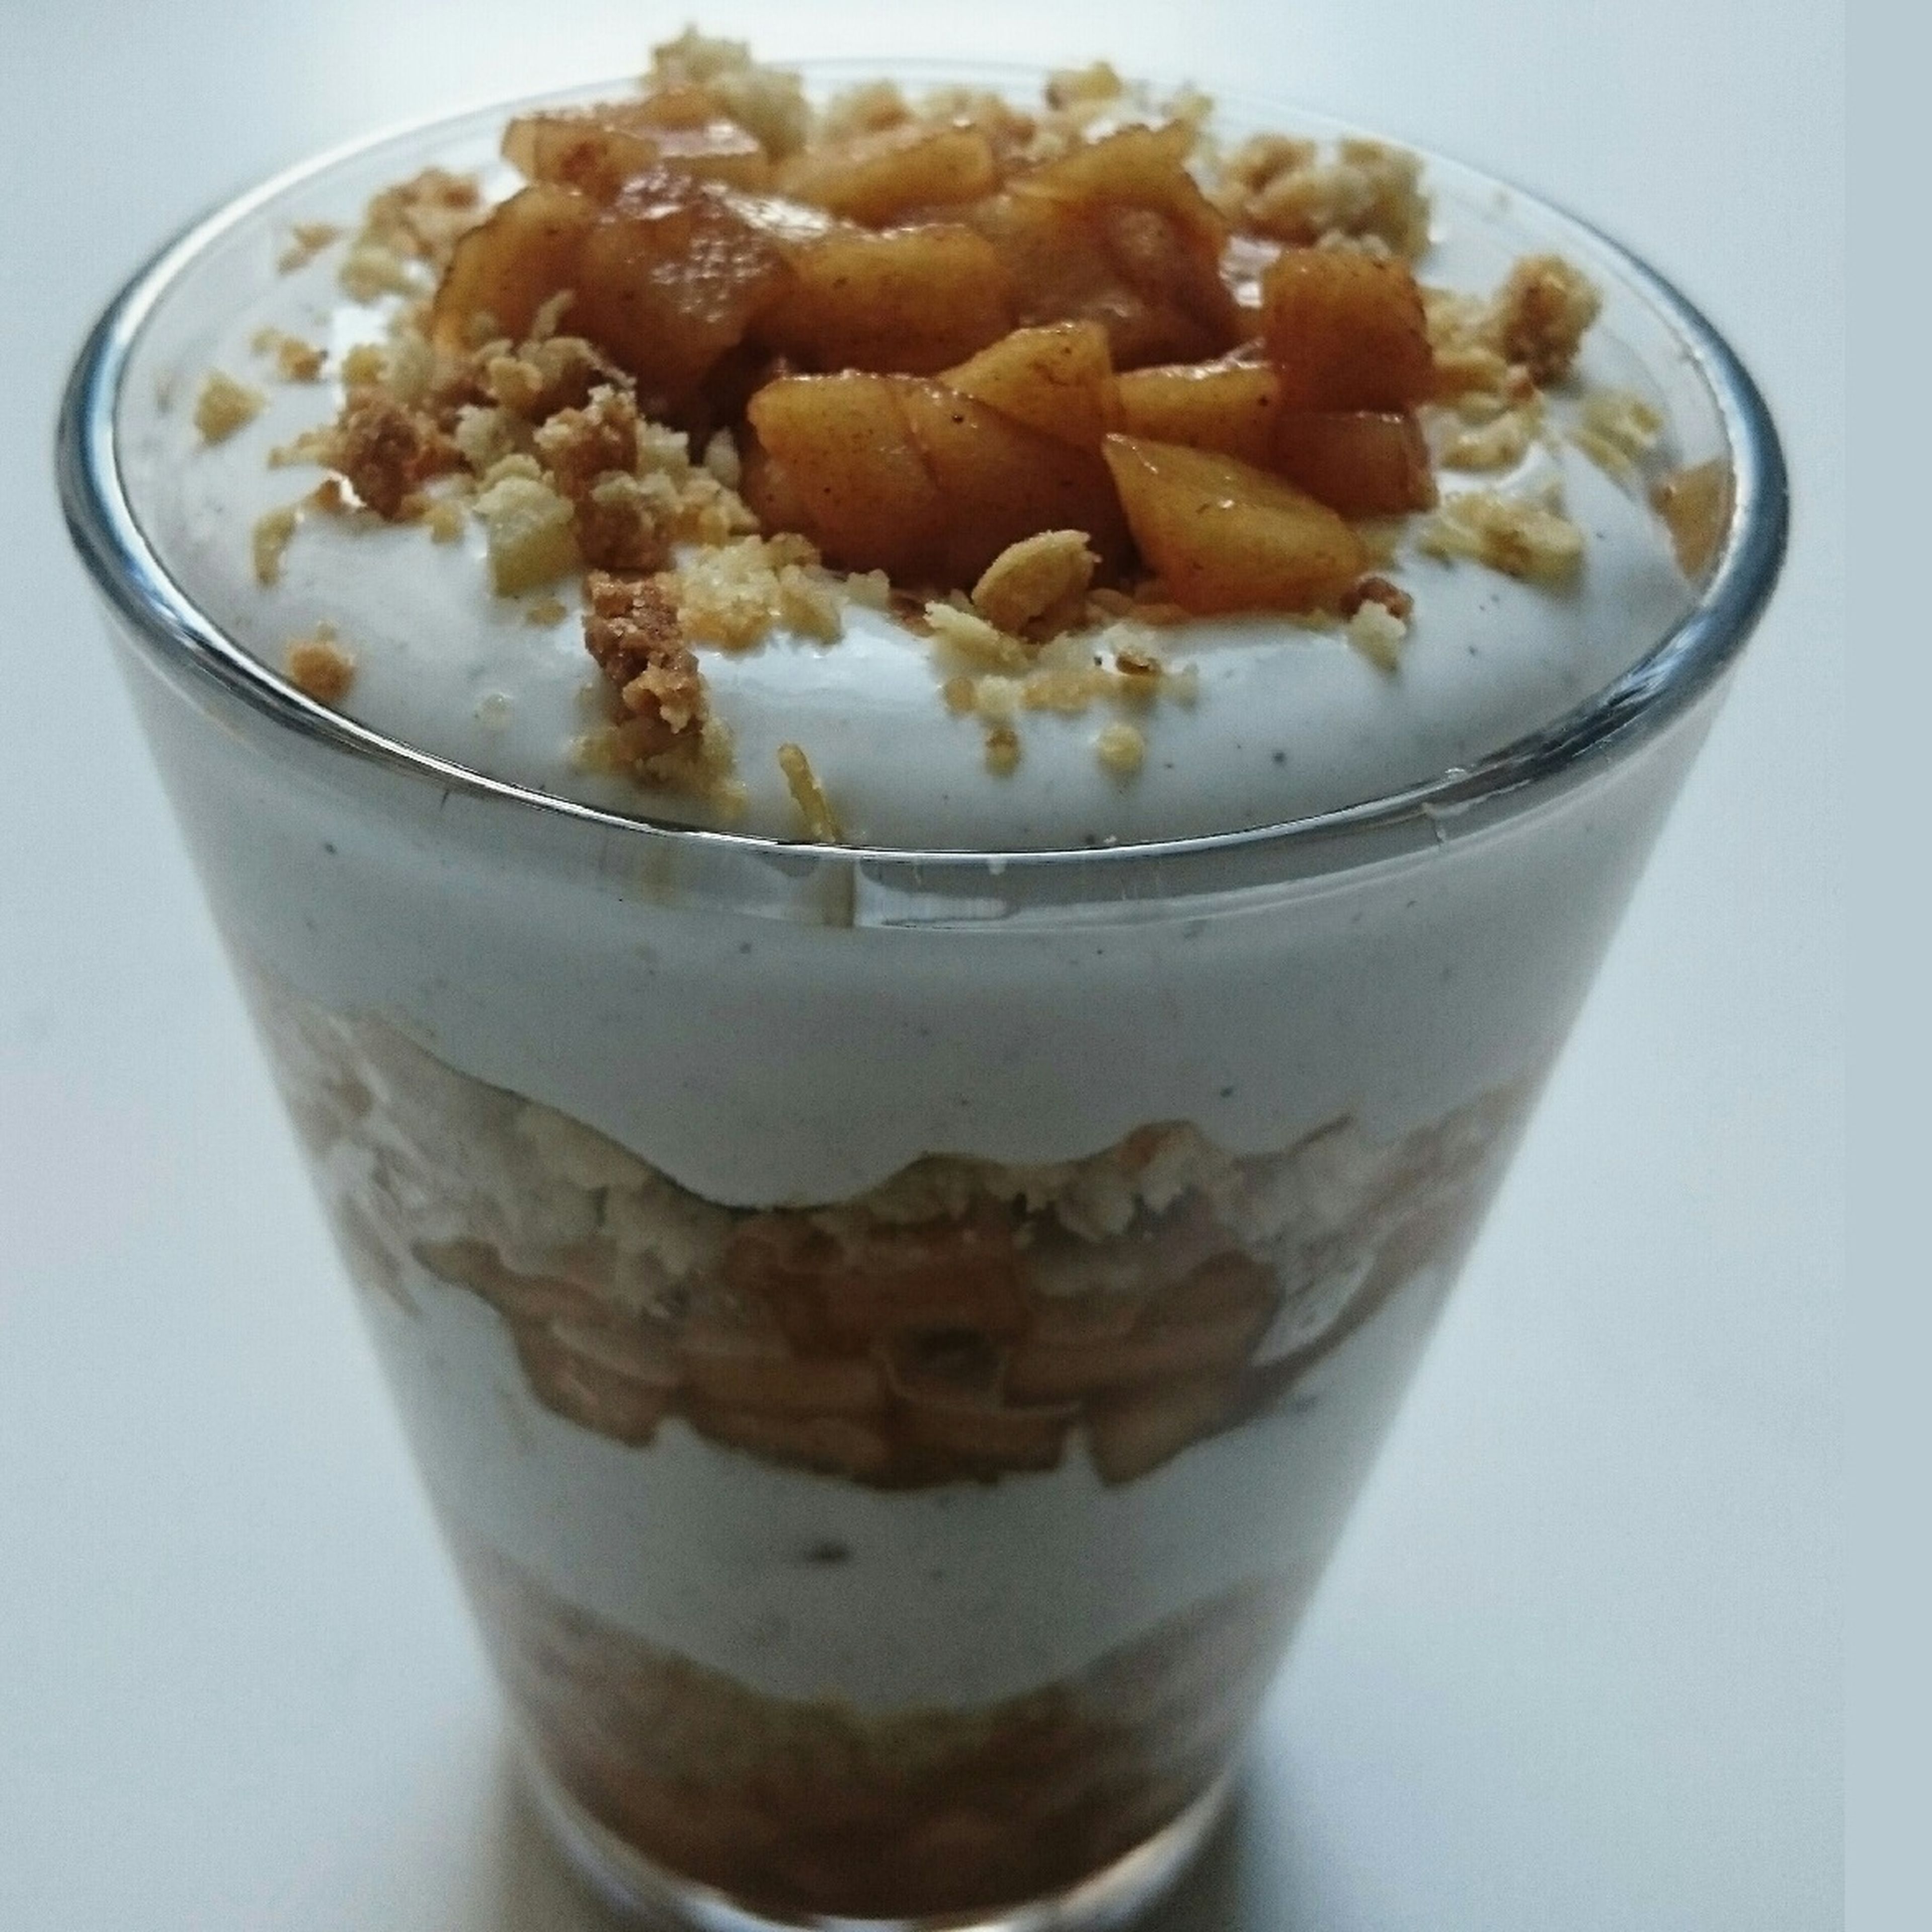 Apple crumble in a glass